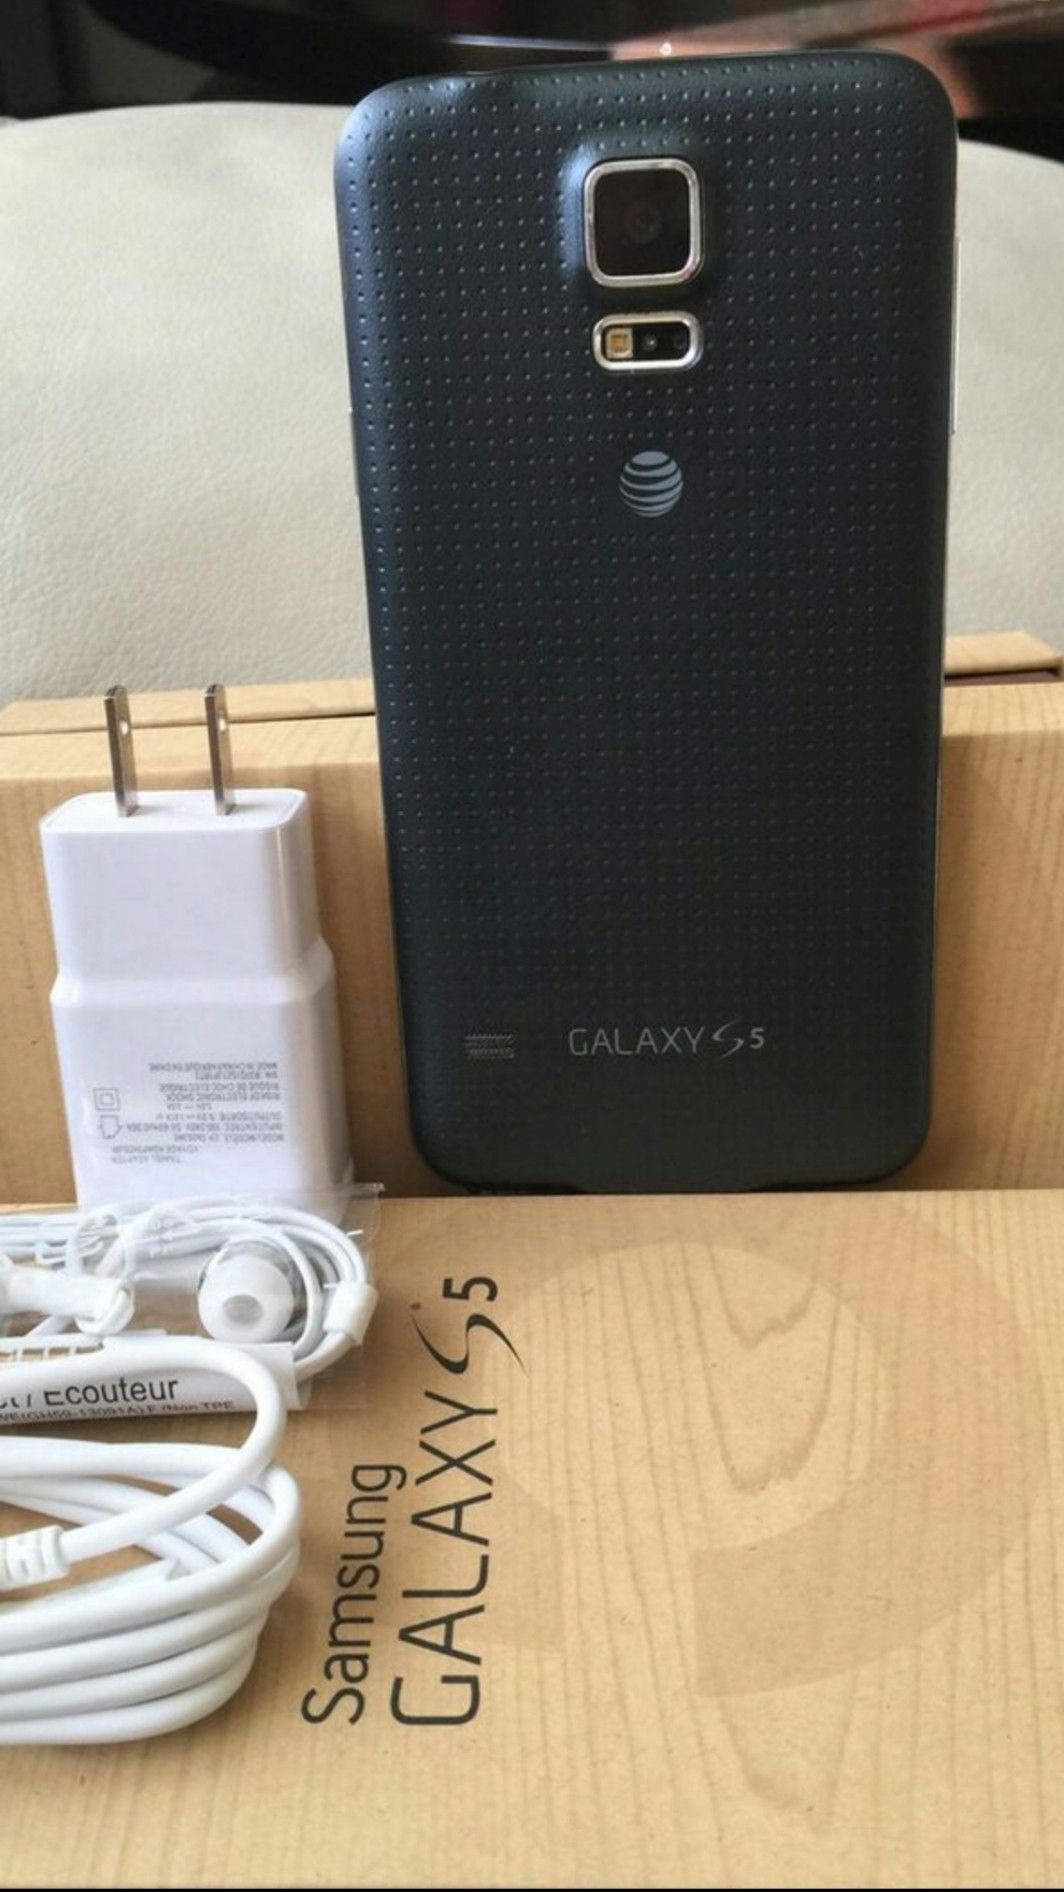 Samsung Galaxy S5 16GB ,,Factory UNLOCKED Excellent CONDITION "aS liKE nEW"